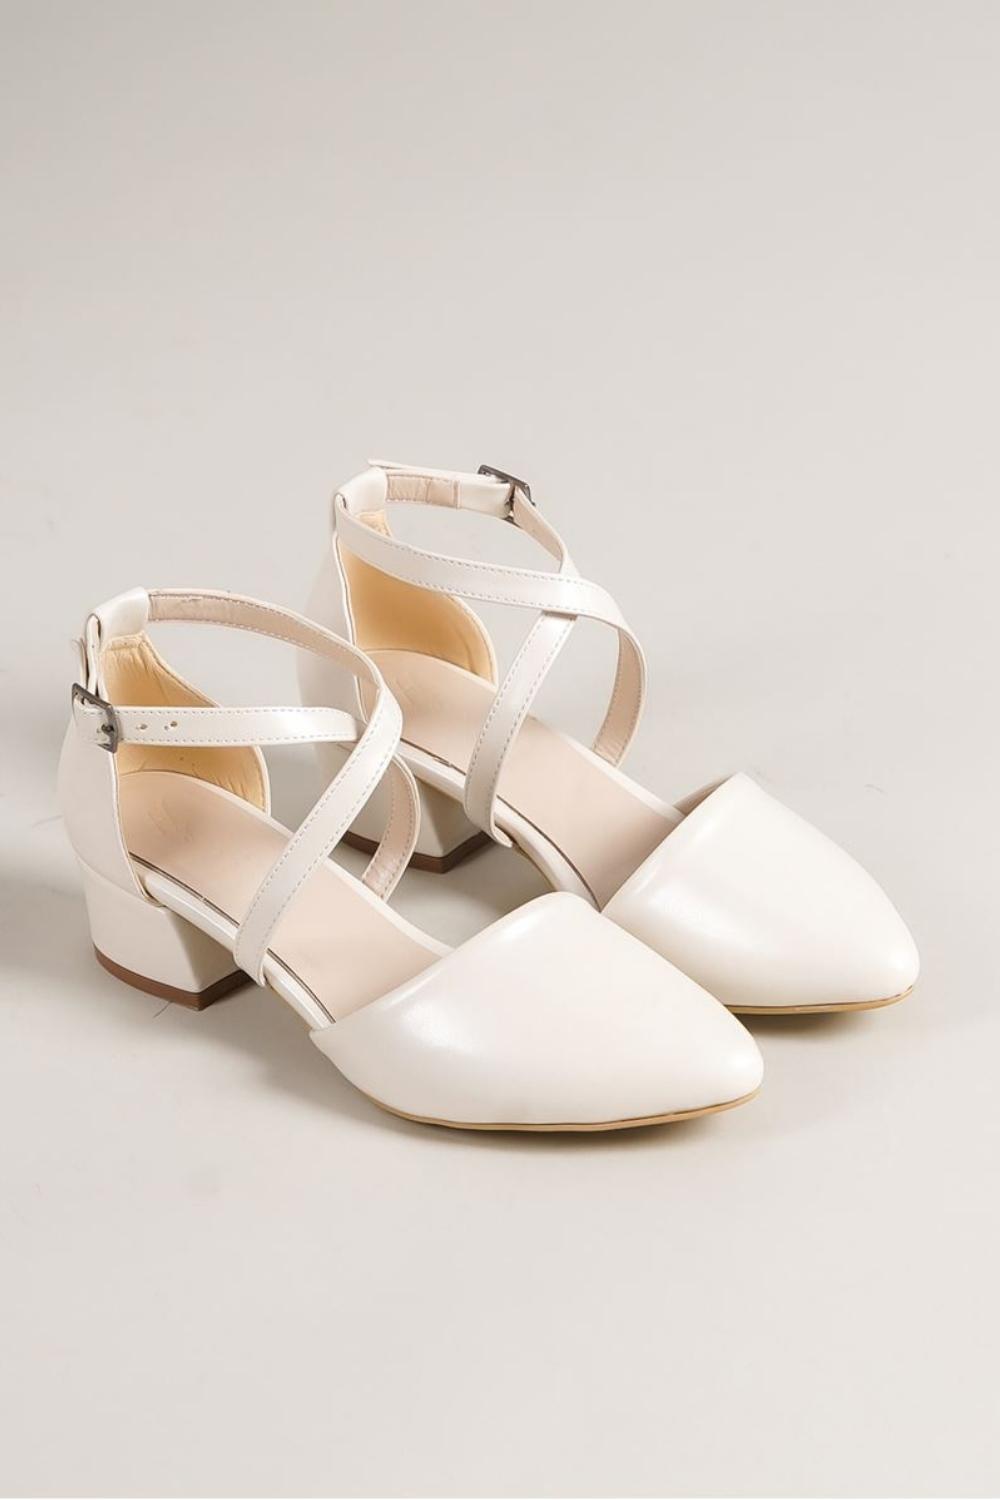 Letha White Pearl Detailed Heeled Women's Shoes - STREETMODE ™